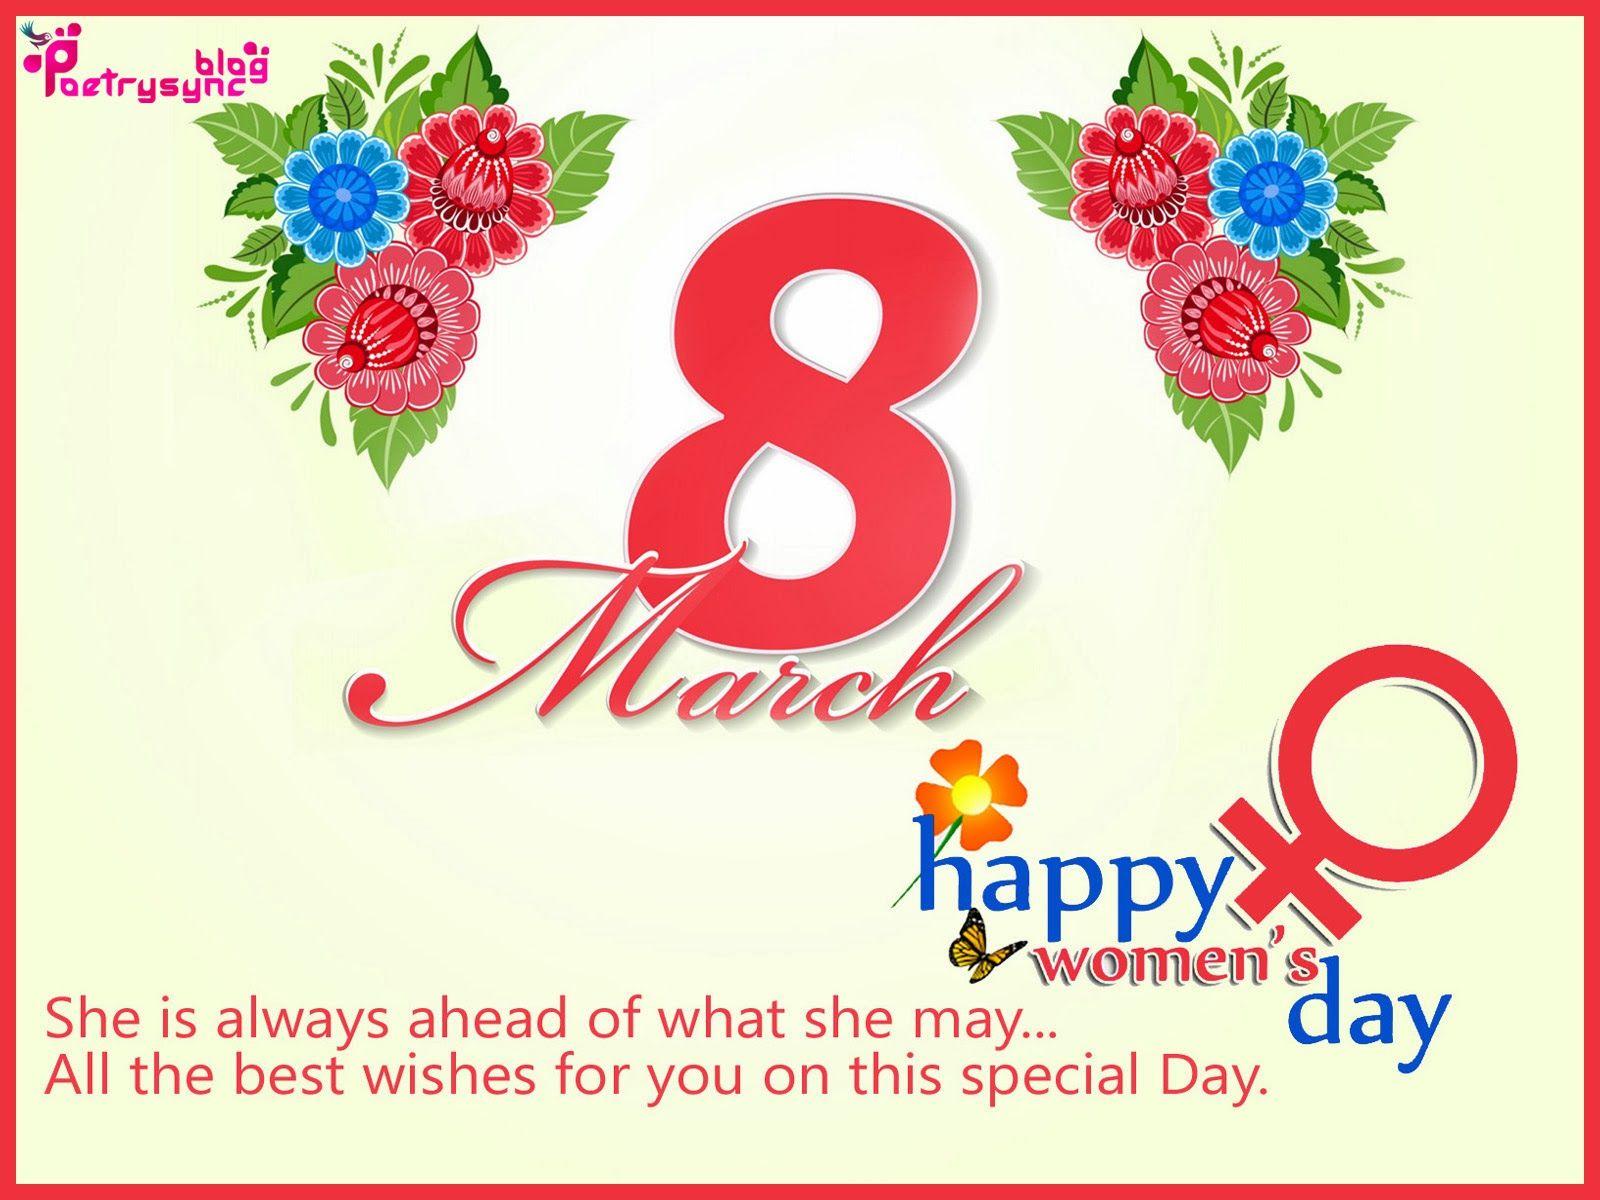 Happy International Women's Day 8 March Wishes and Greetings sms